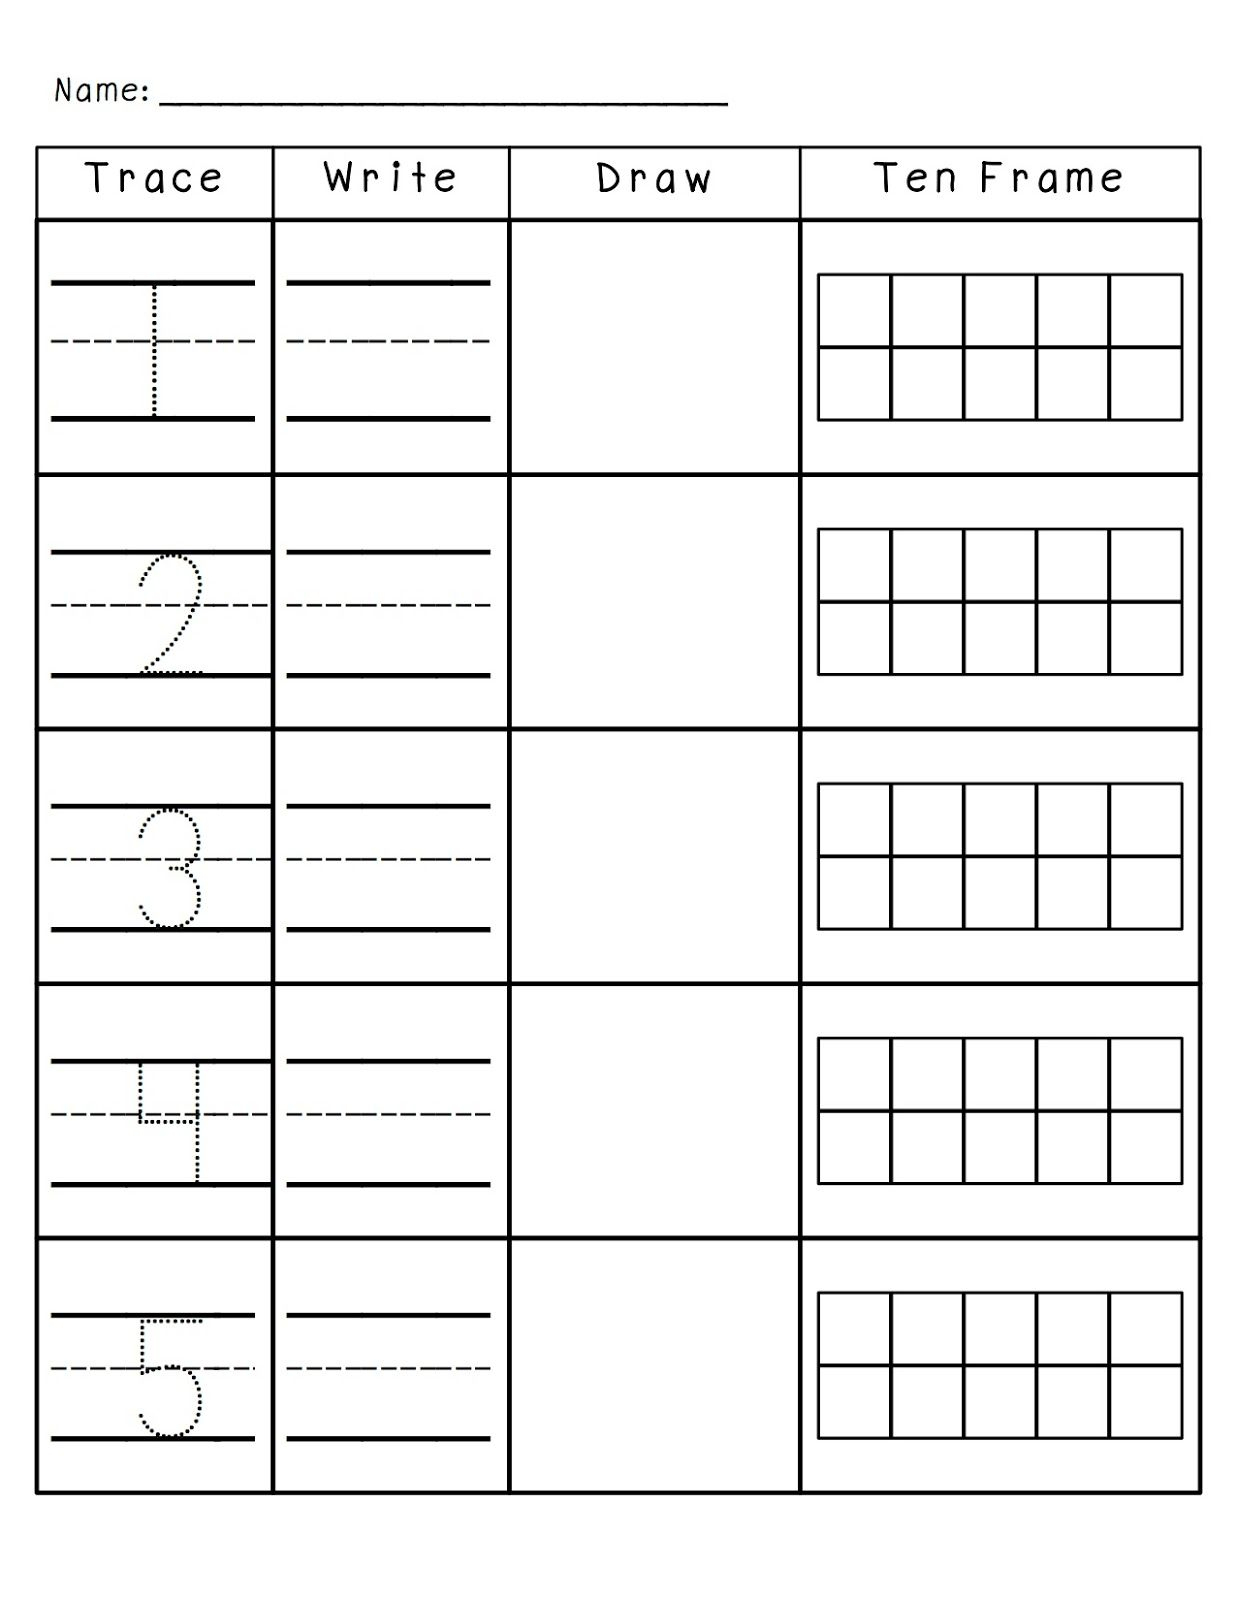 Number Practice 1-10: Trace, Write, Draw, Fill In Ten Frame. Plus A | Frame Games Printable Worksheets